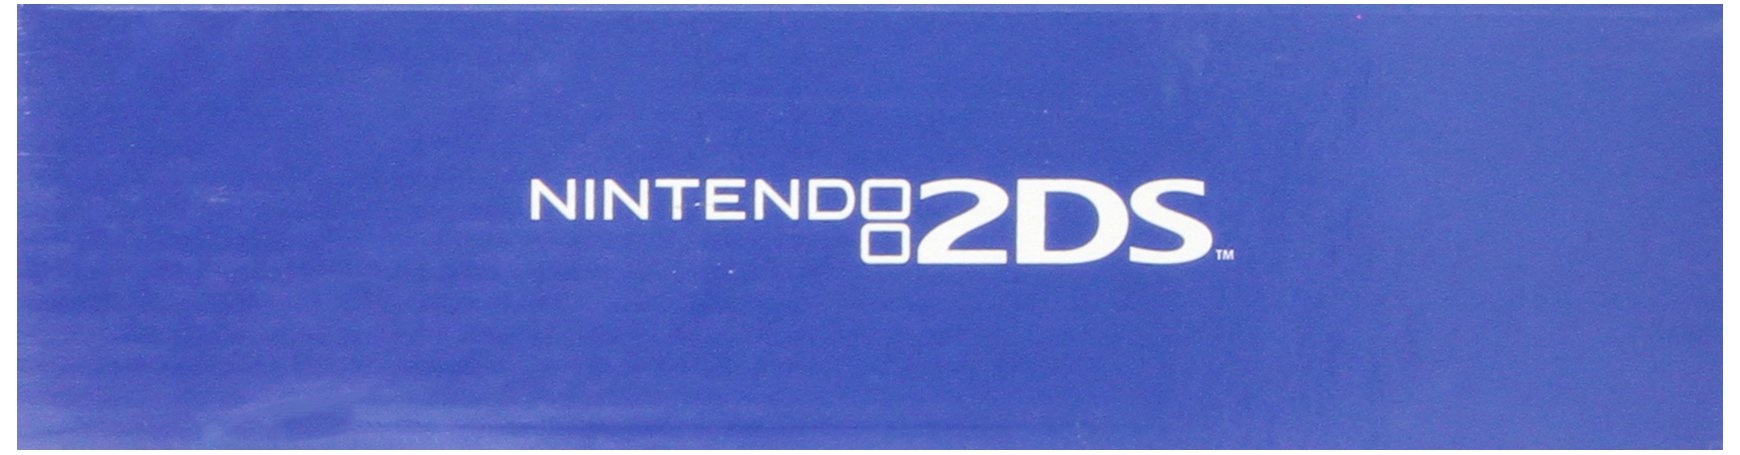 Nintendo 2DS Handheld System with Mario Kart 7 - Electric Blue